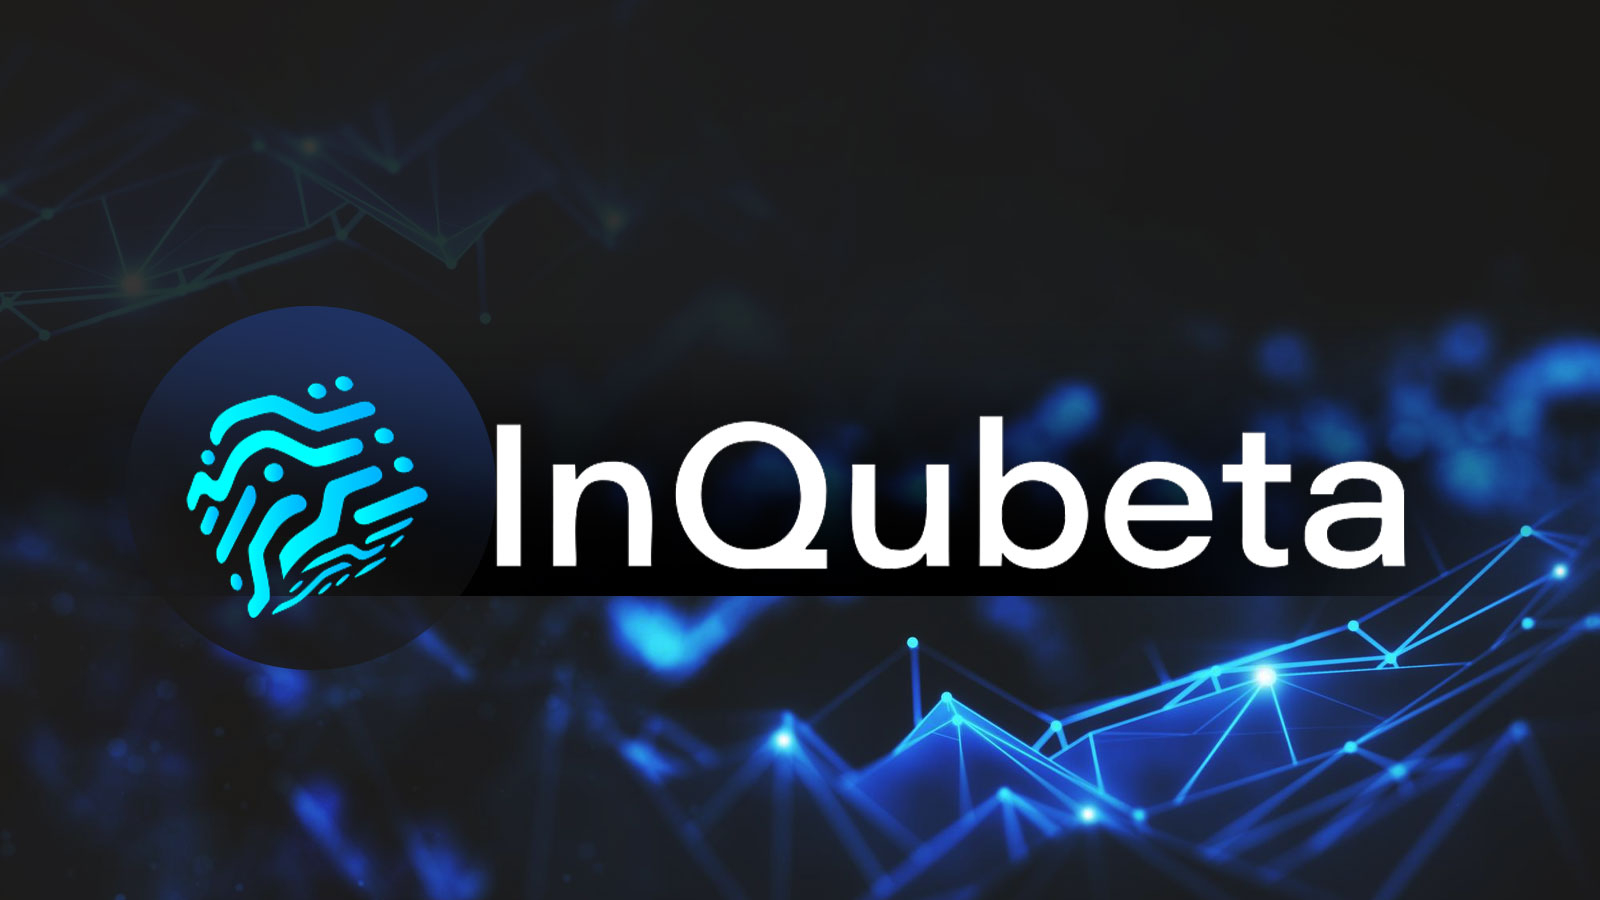 InQubeta (QUBE) Token Release Might be Gaining Steam Now as Cardano (ADA) Sets New Activity Record